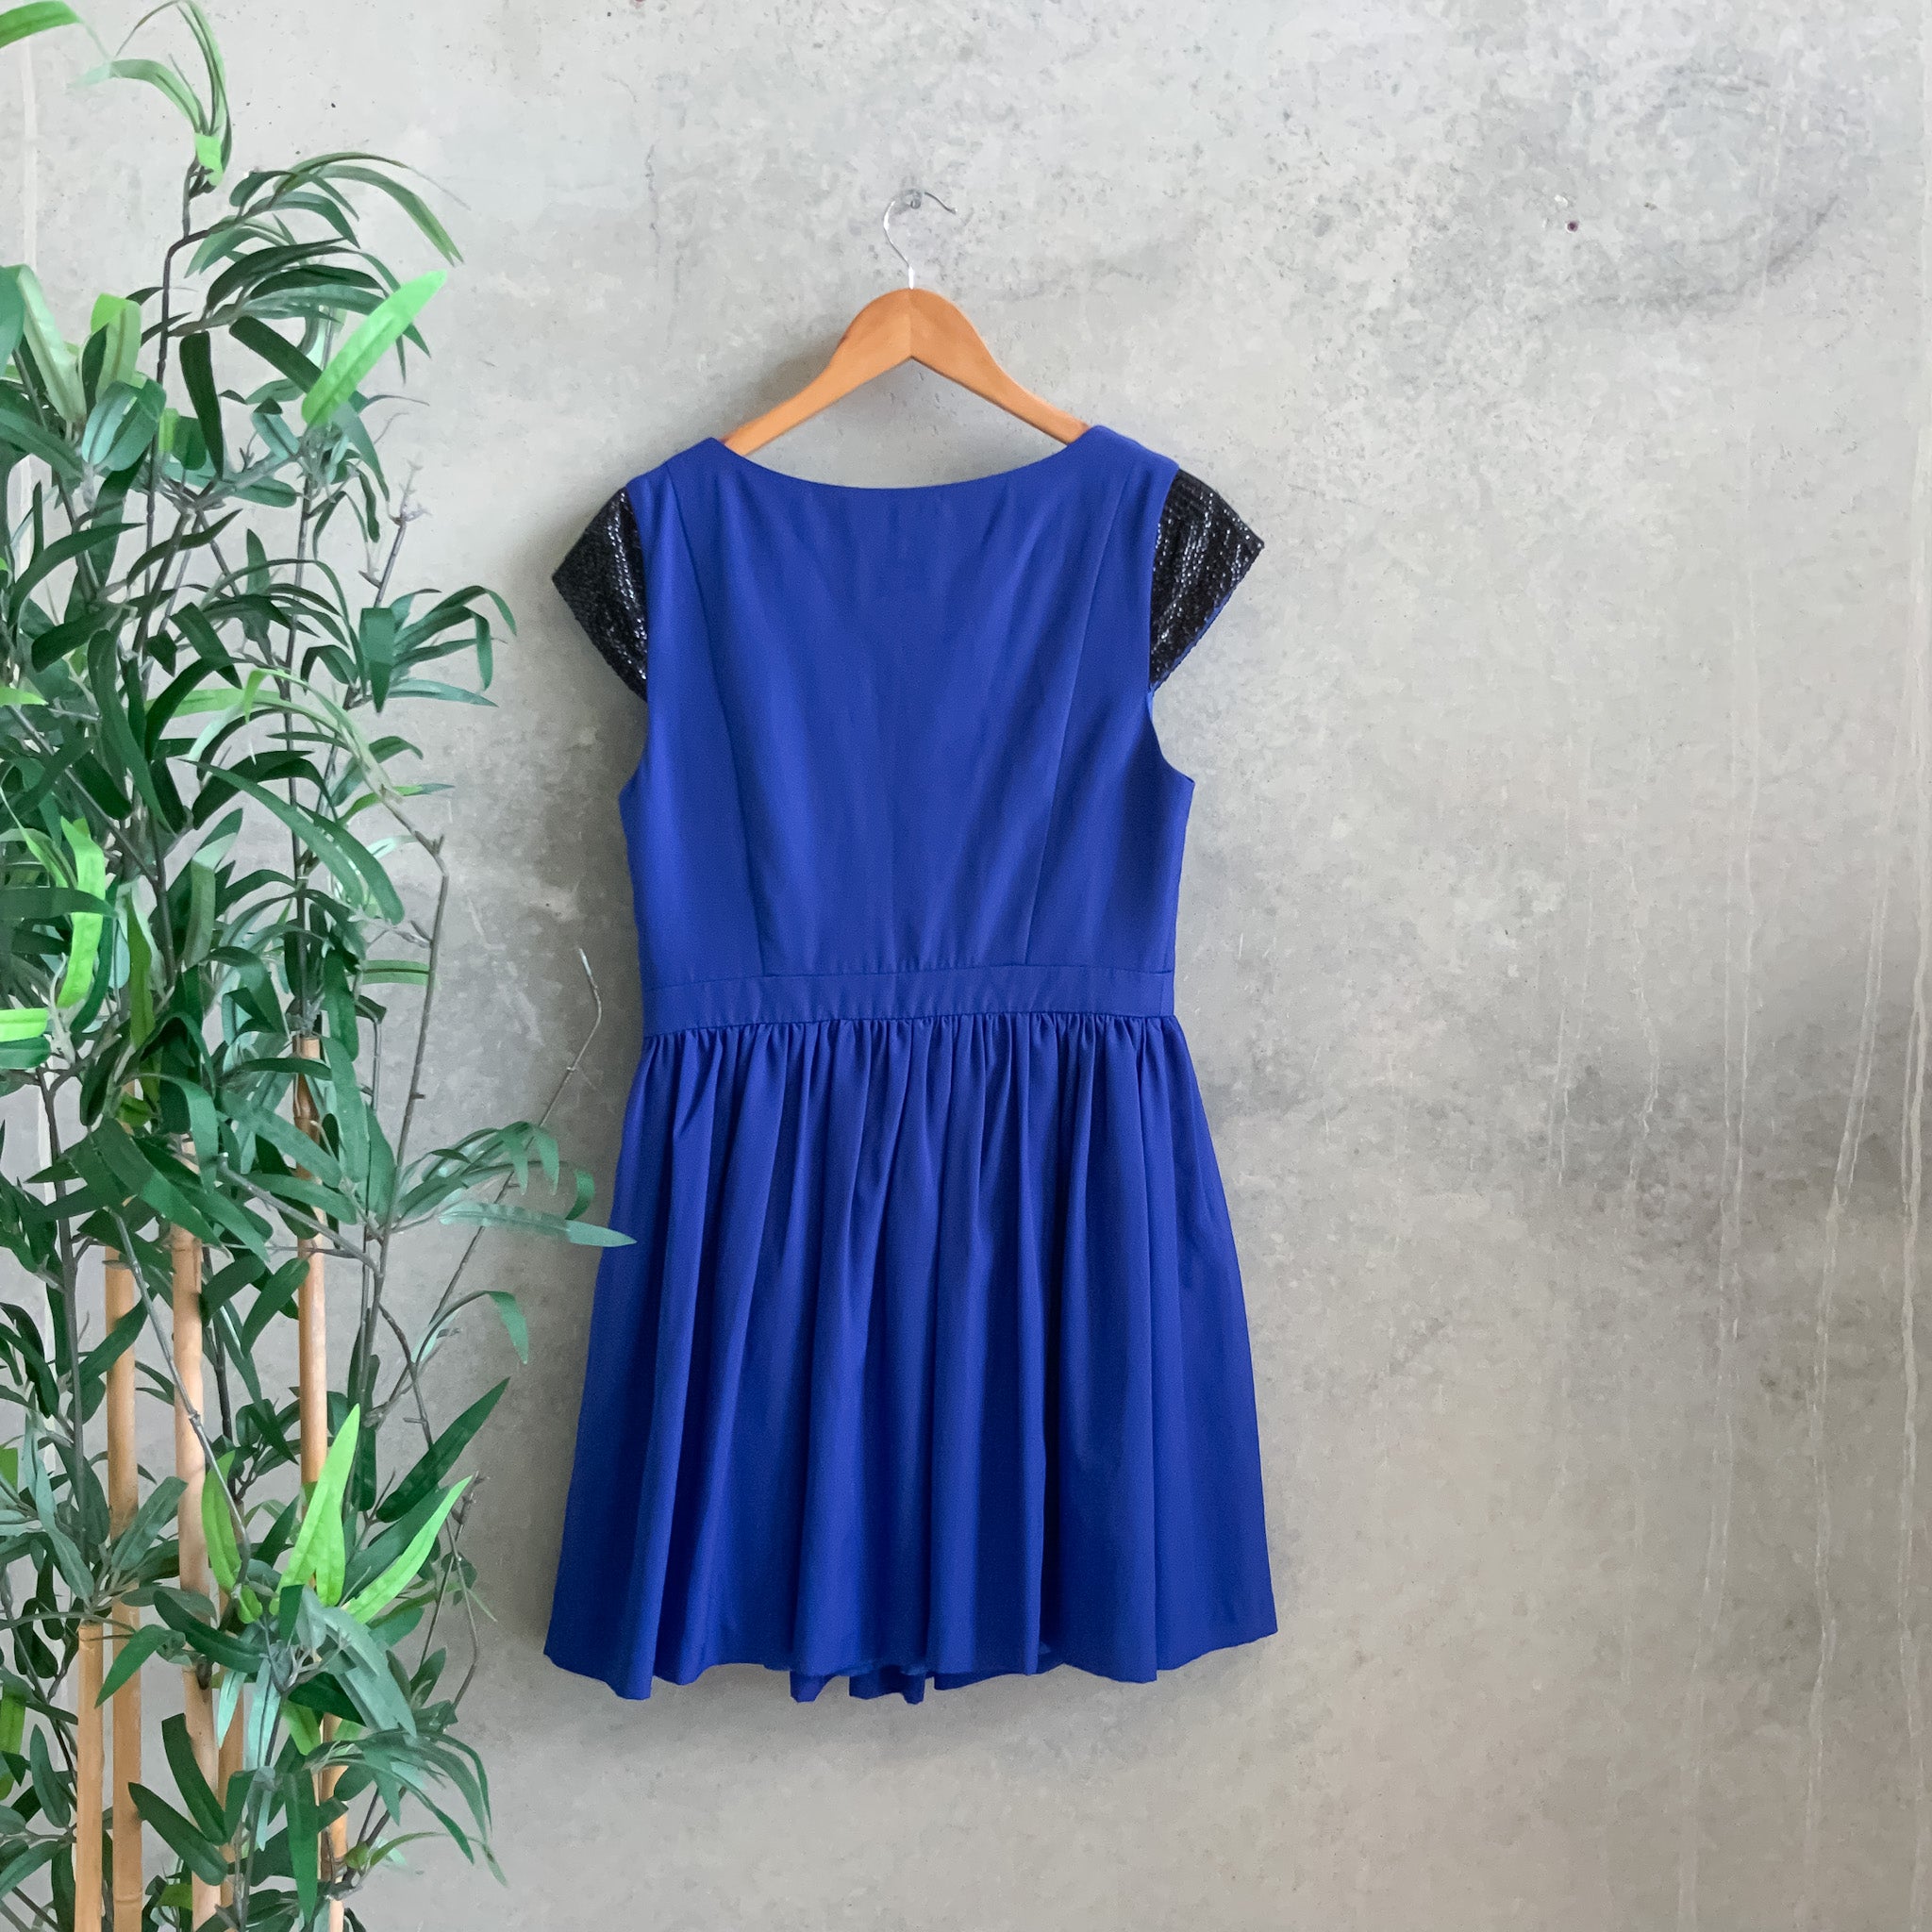 BLUEJUICE Cobalt Blue Capped Sleeve Fit & Flare Party/Cocktail Mini Dress- Size 12